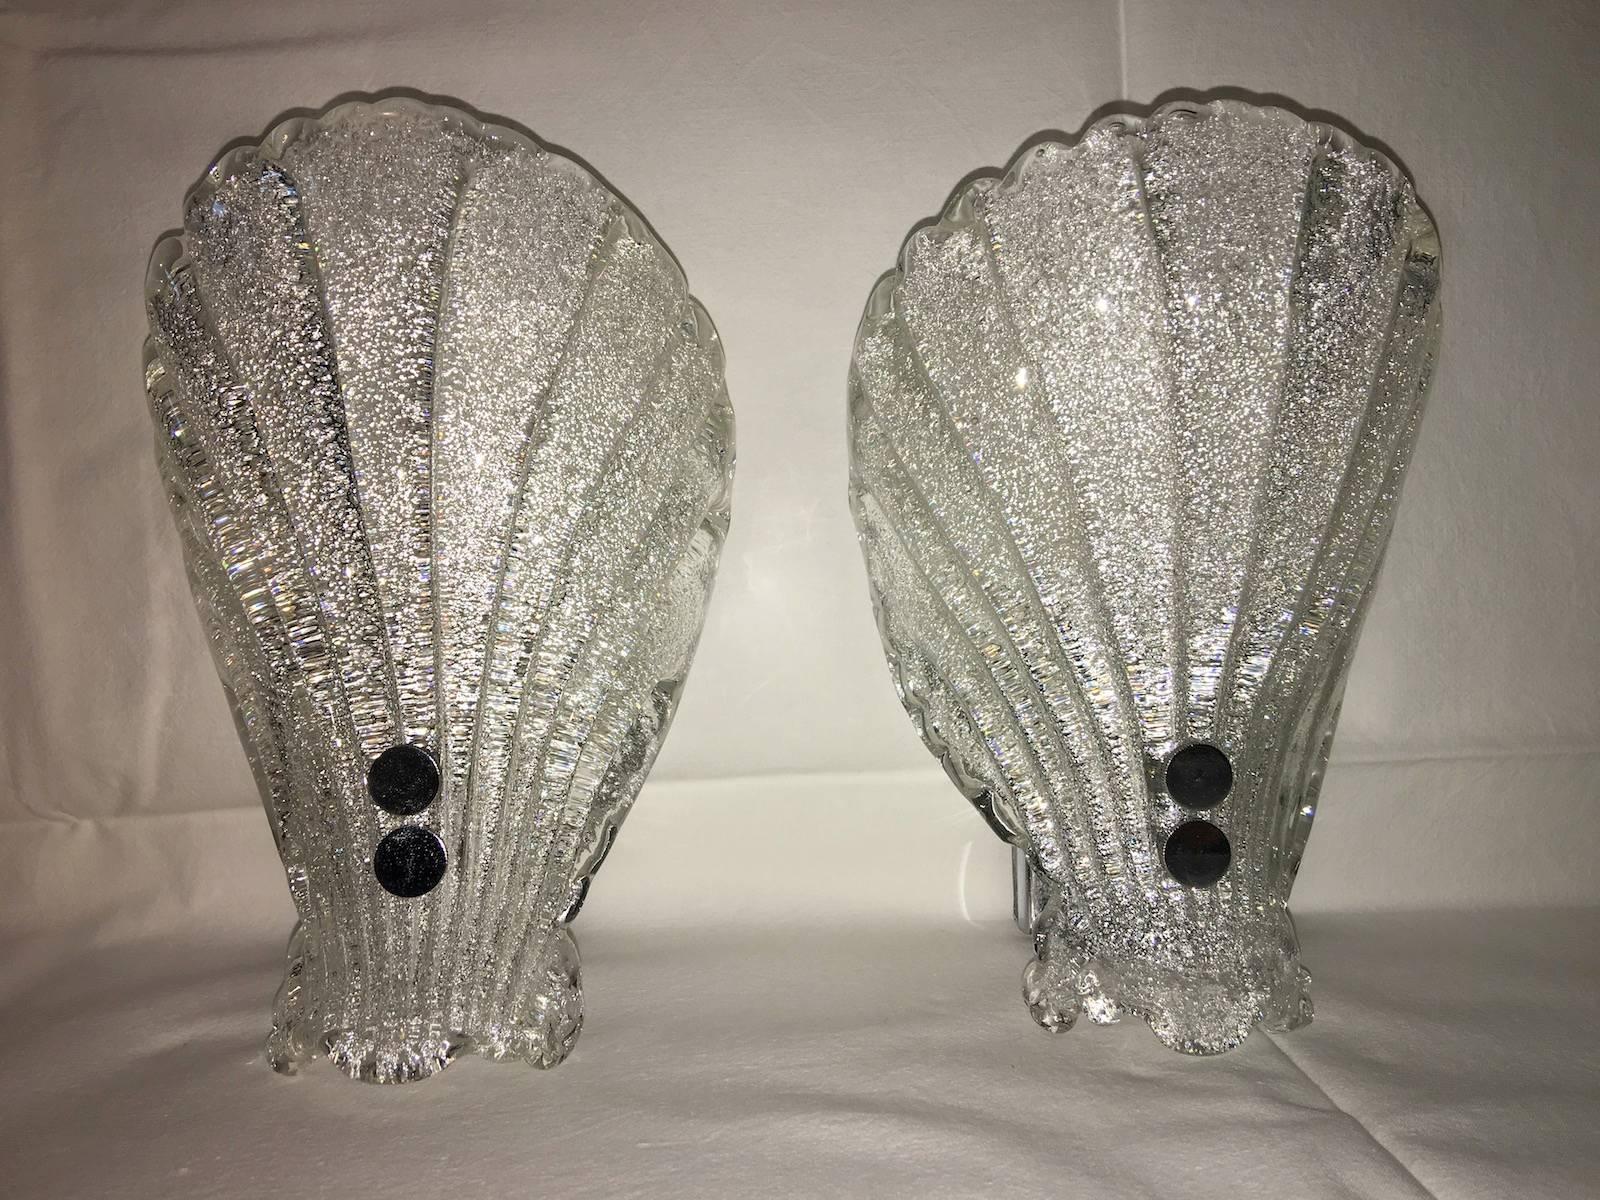 Pair of sconces with ribbed Murano glass shades.
With the 1960's came the accentuated use of glass elements and vintage Italian lights manufacturing companies like Venini and Mazzega who had a strong influence on the modernization of lighting design